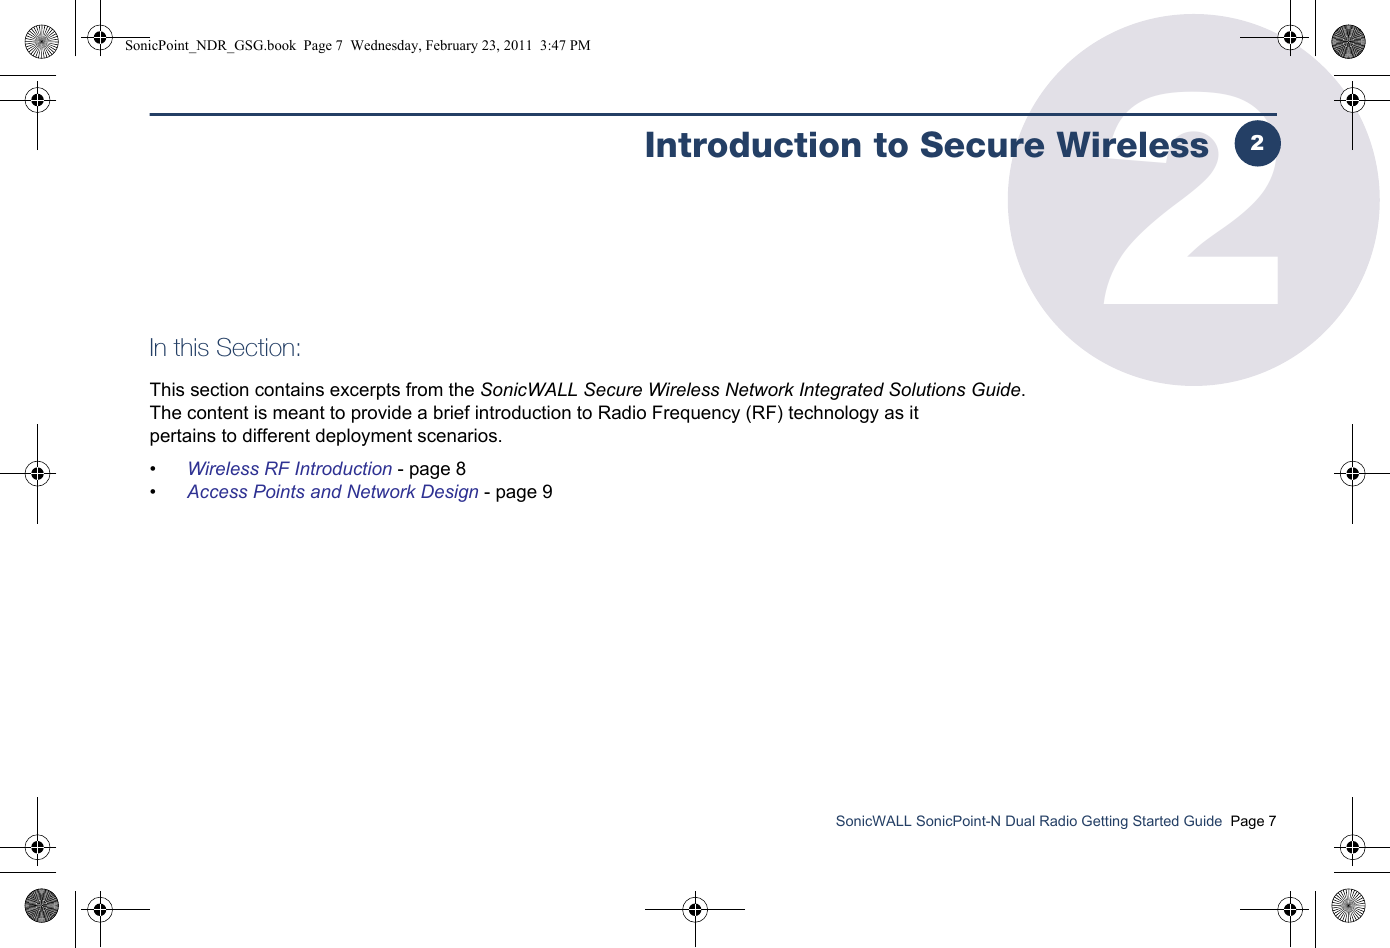 SonicWALL SonicPoint-N Dual Radio Getting Started Guide  Page 72Introduction to Secure WirelessIn this Section:This section contains excerpts from the SonicWALL Secure Wireless Network Integrated Solutions Guide. The content is meant to provide a brief introduction to Radio Frequency (RF) technology as it pertains to different deployment scenarios.•Wireless RF Introduction - page 8•Access Points and Network Design - page 92SonicPoint_NDR_GSG.book  Page 7  Wednesday, February 23, 2011  3:47 PM